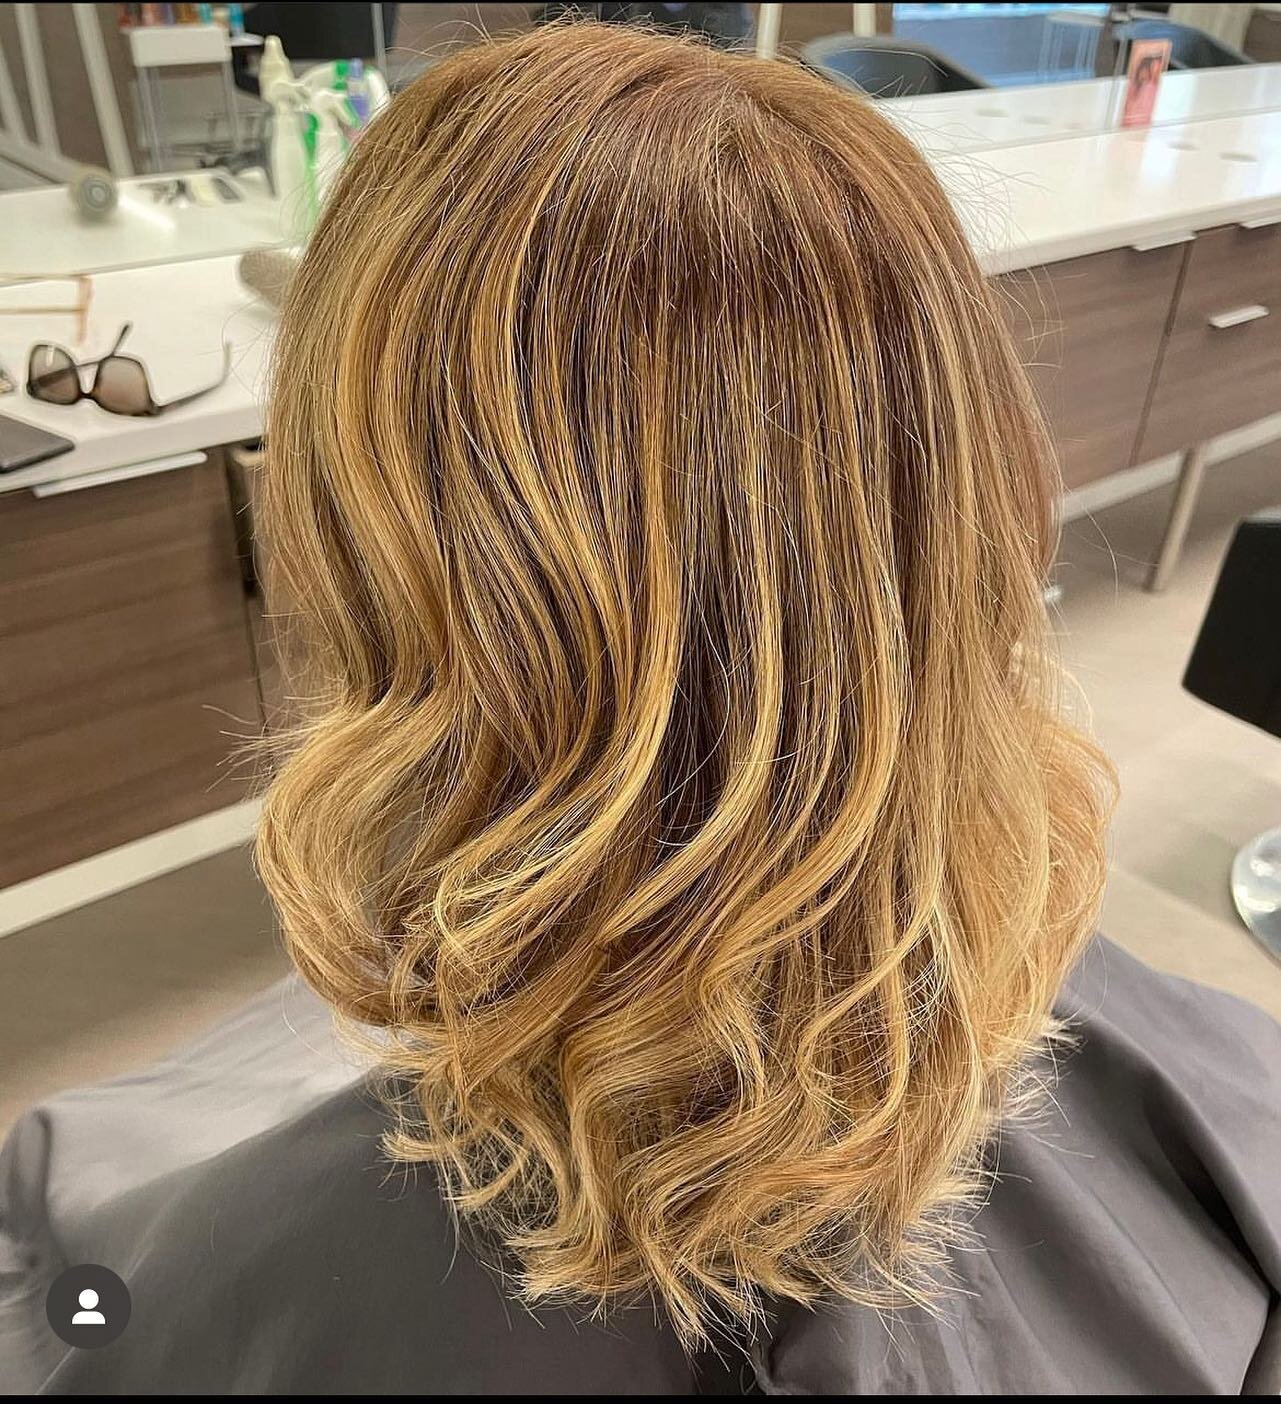 Beautiful golden blonde goodness ☀️☀️☀️☀️

Hair by @hairbytiffanyr at our Broadmead location! 

#victoriasalon #aveda #kerastase #wella #blondehair